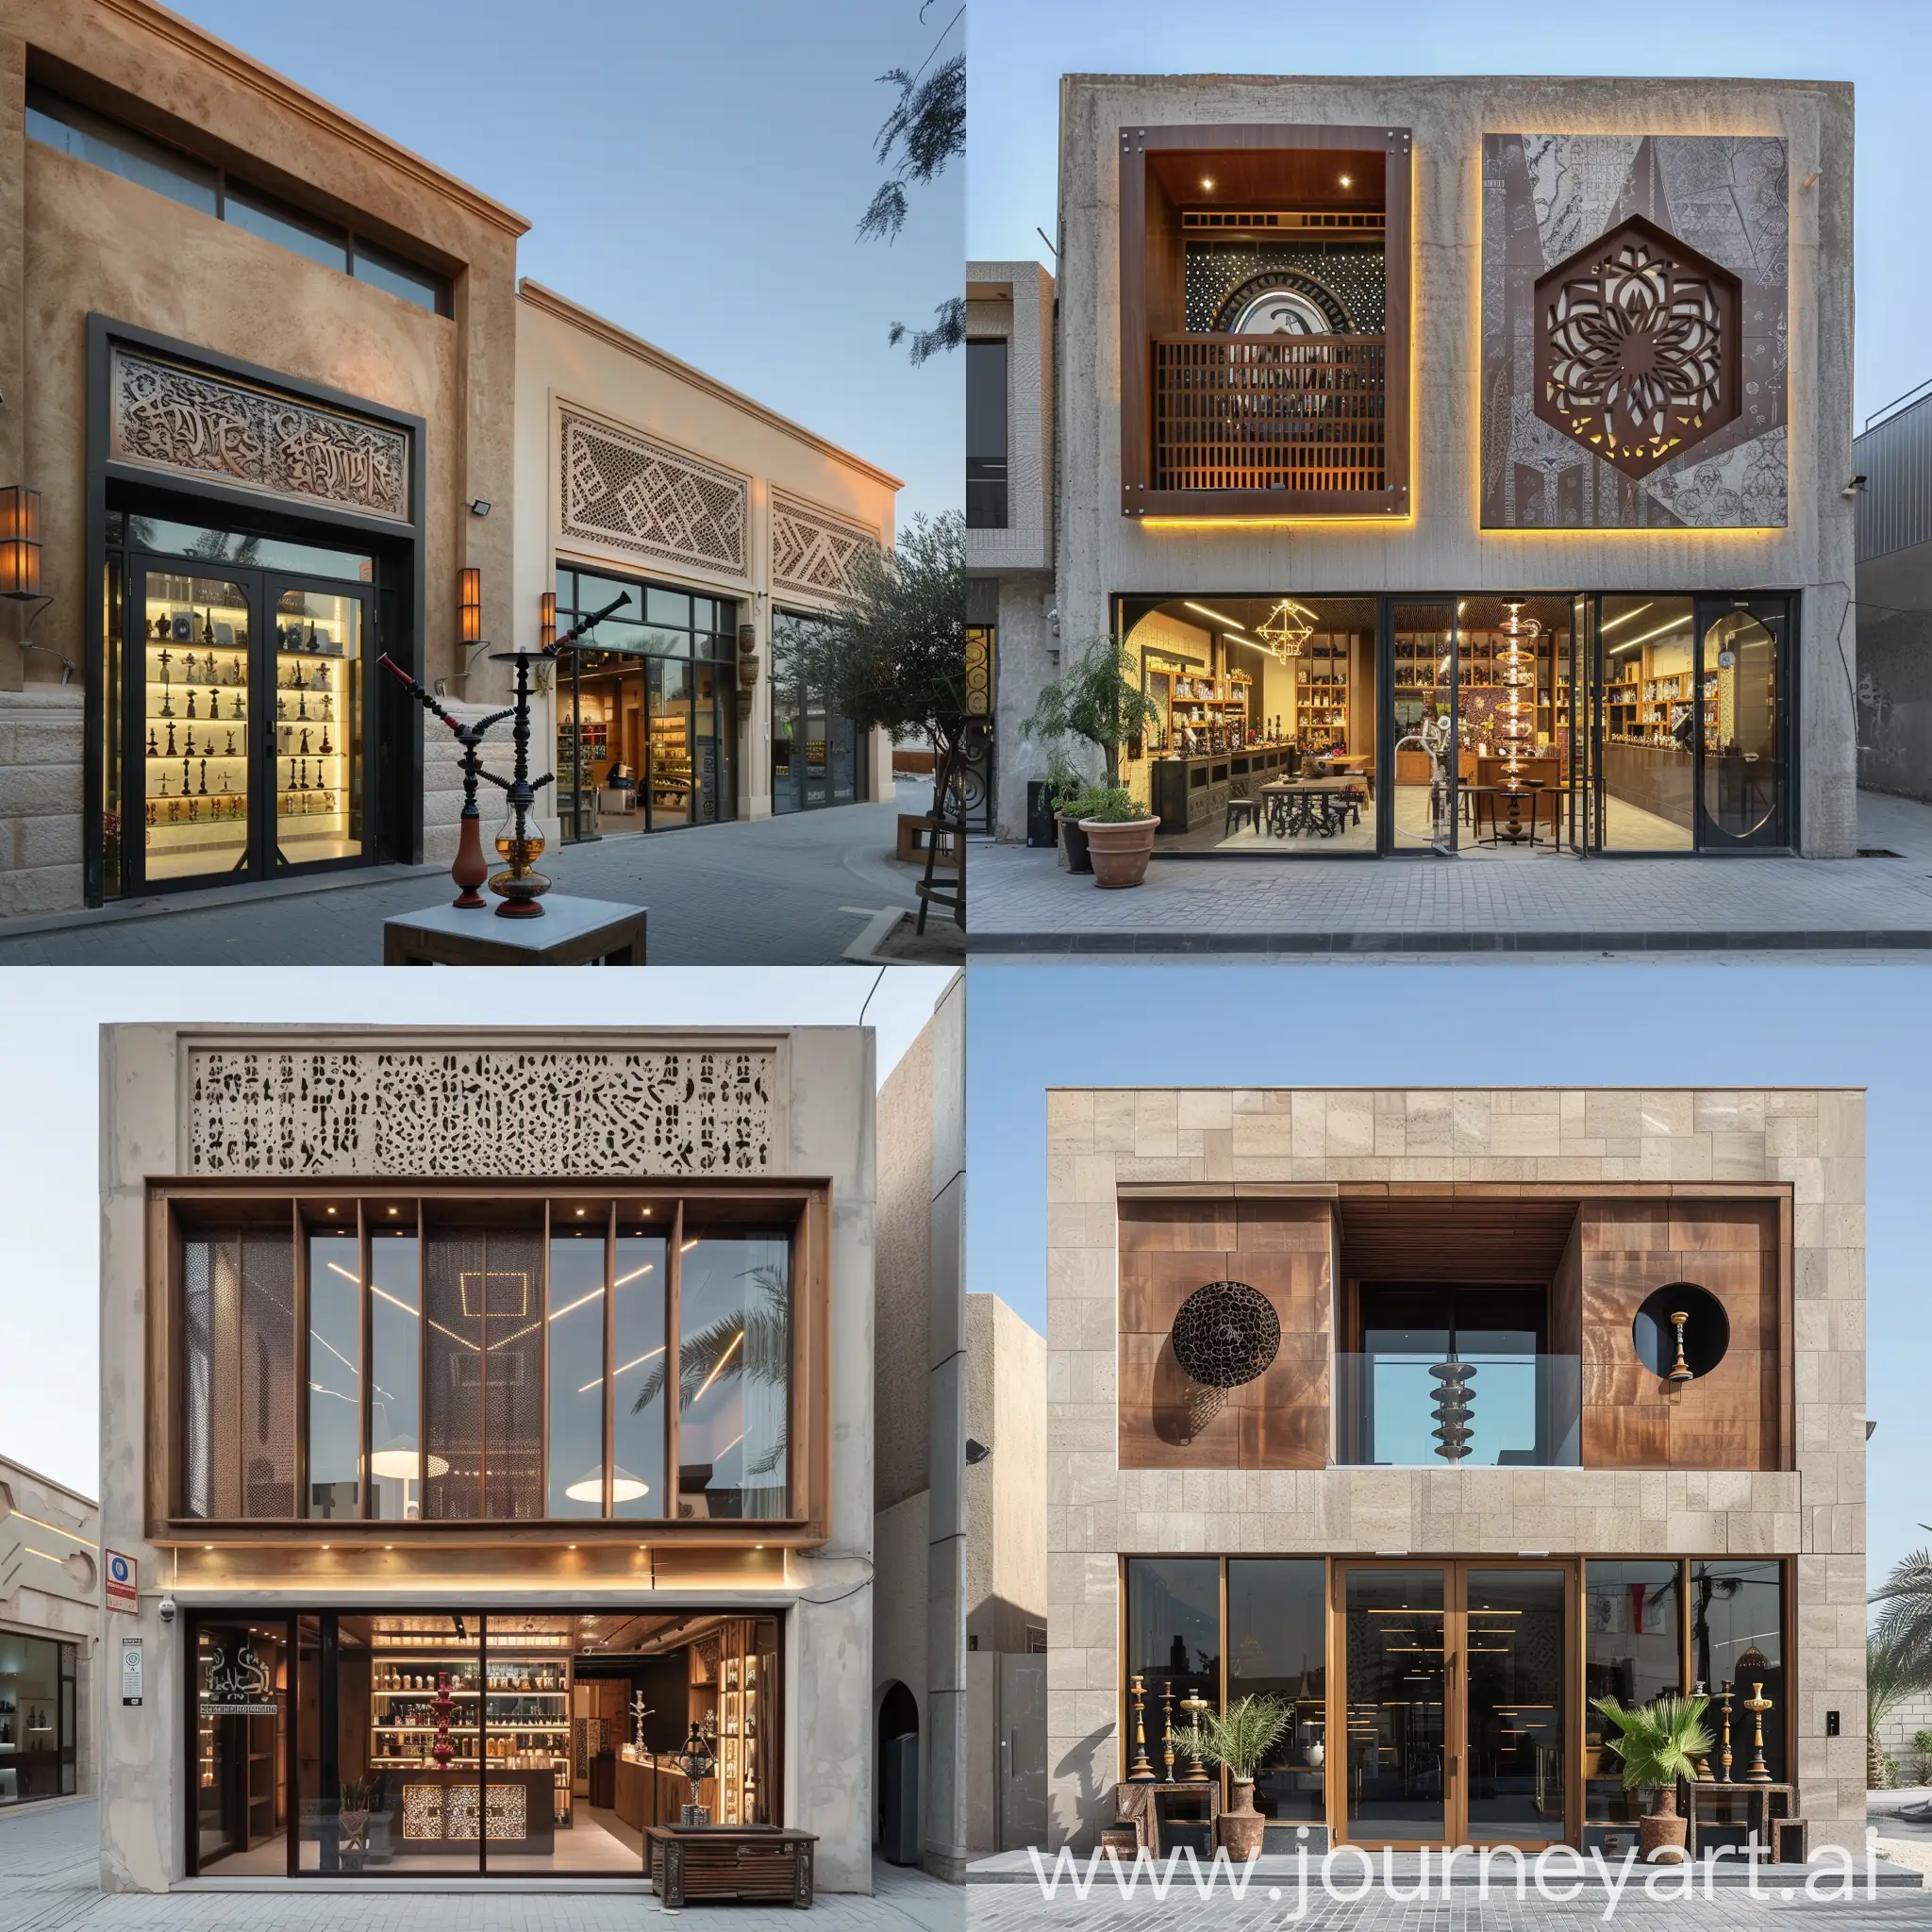 The exterior of a hookah and tobacco shop in a traditional style inspired by modern architecture